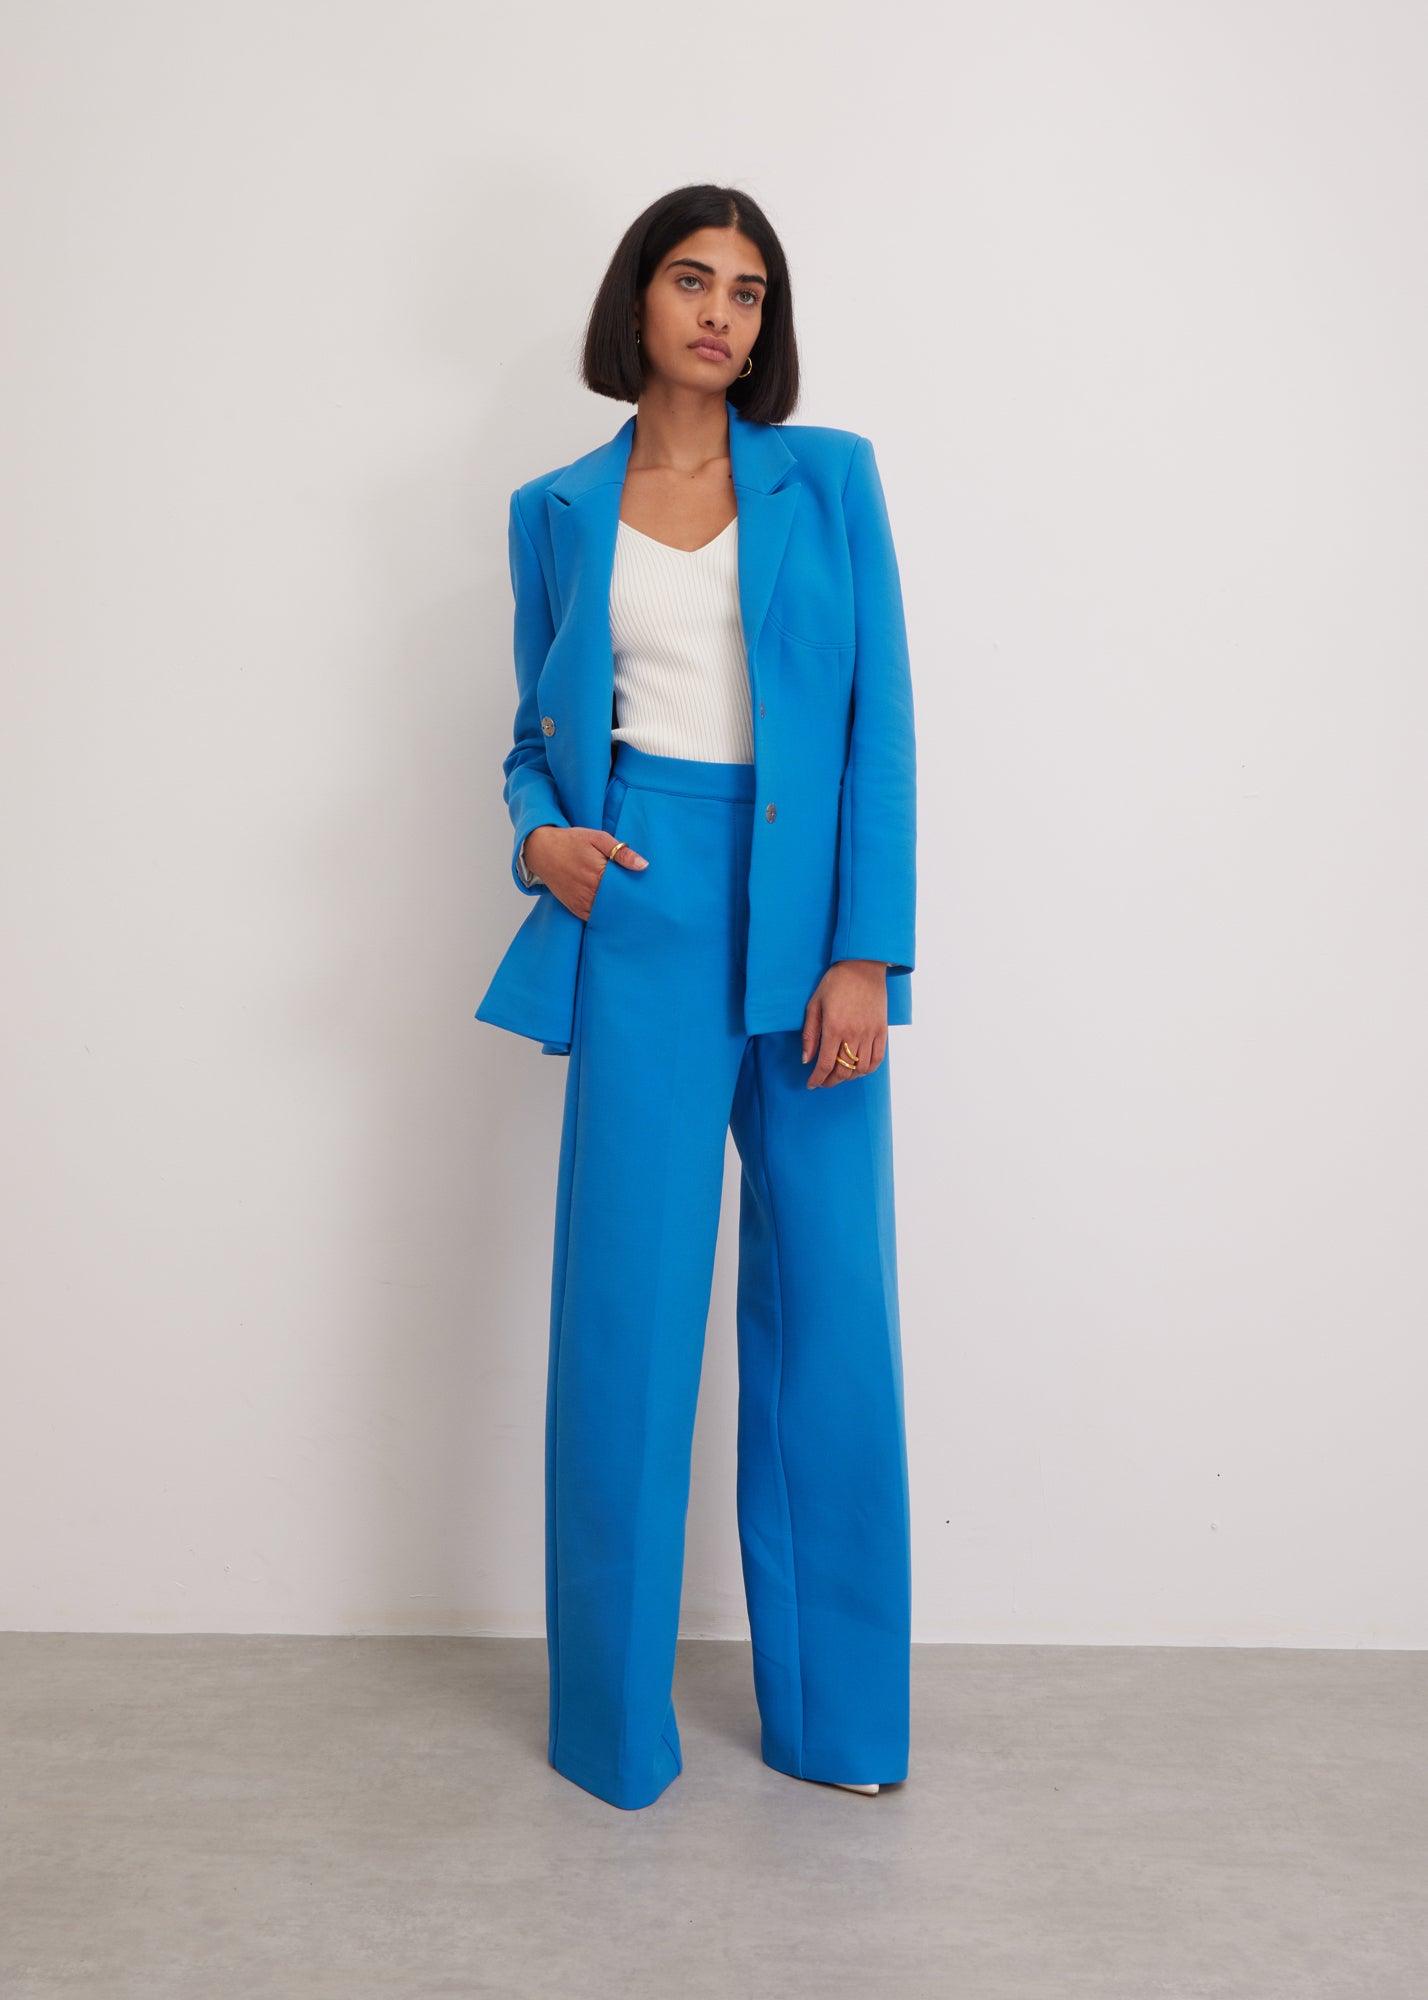 Straight Blue Trousers | Sustainable Fashion Brand 